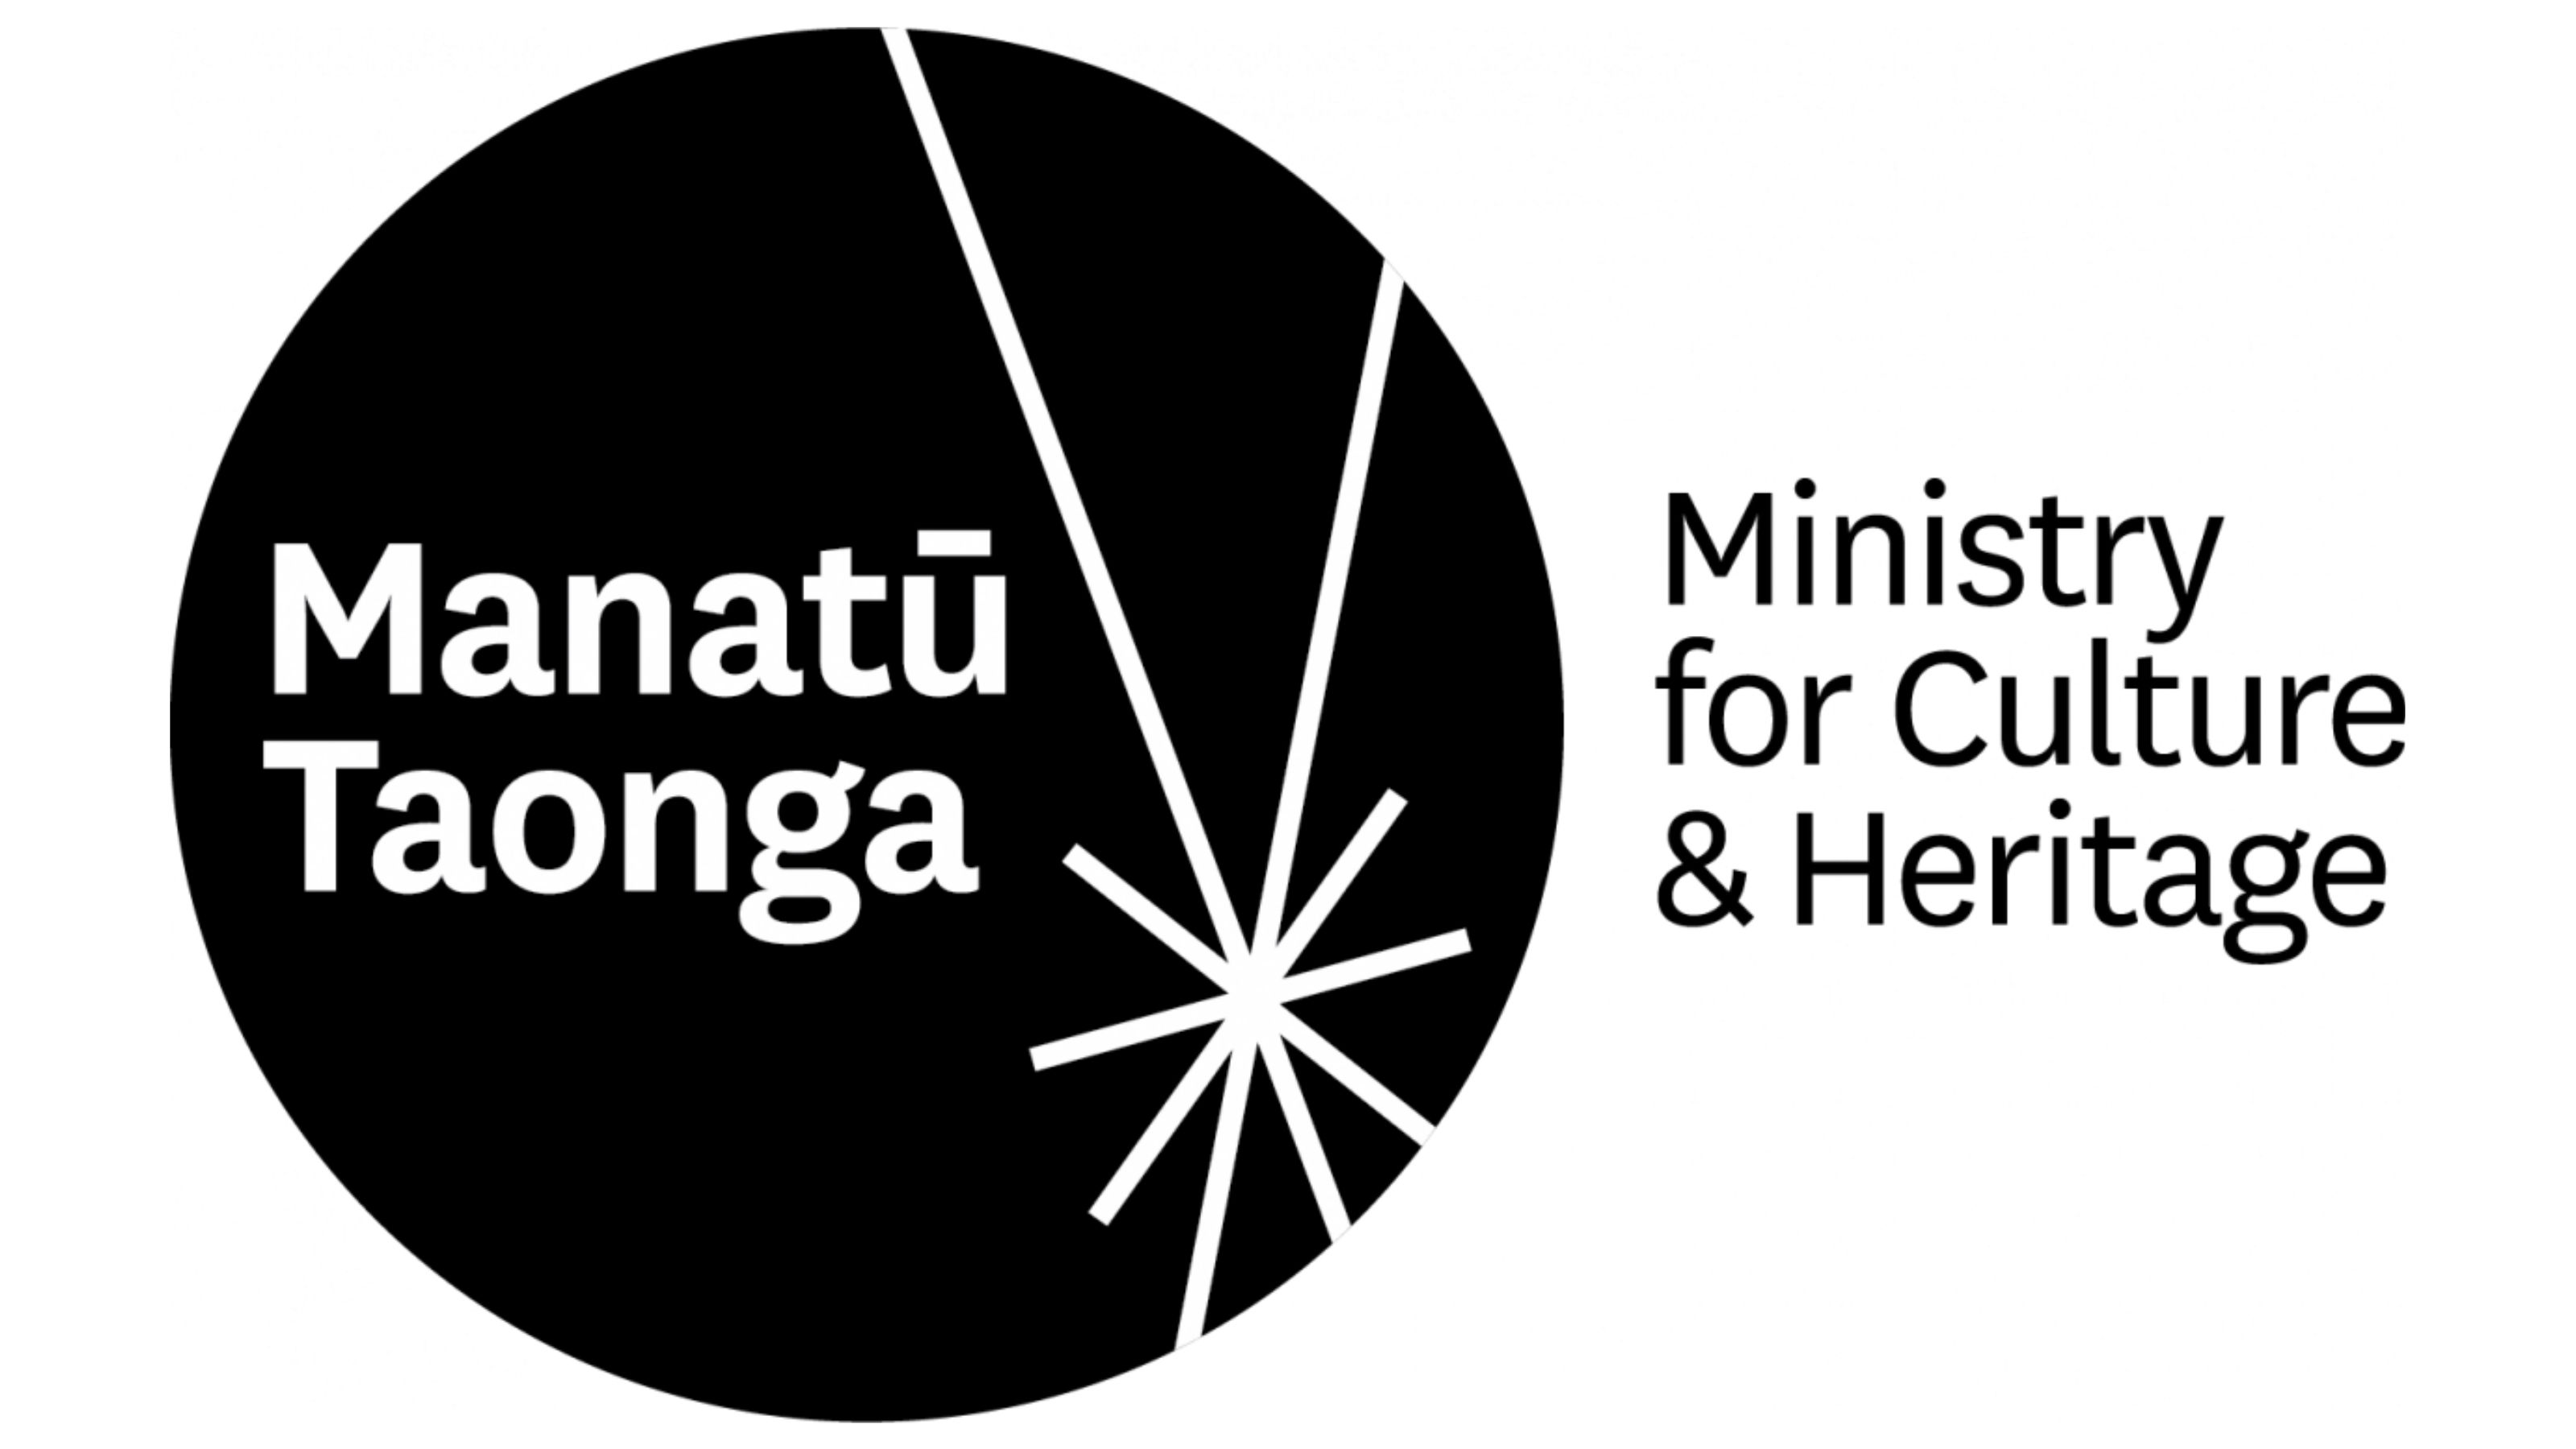 Ministry for Culture and Heritage logo.